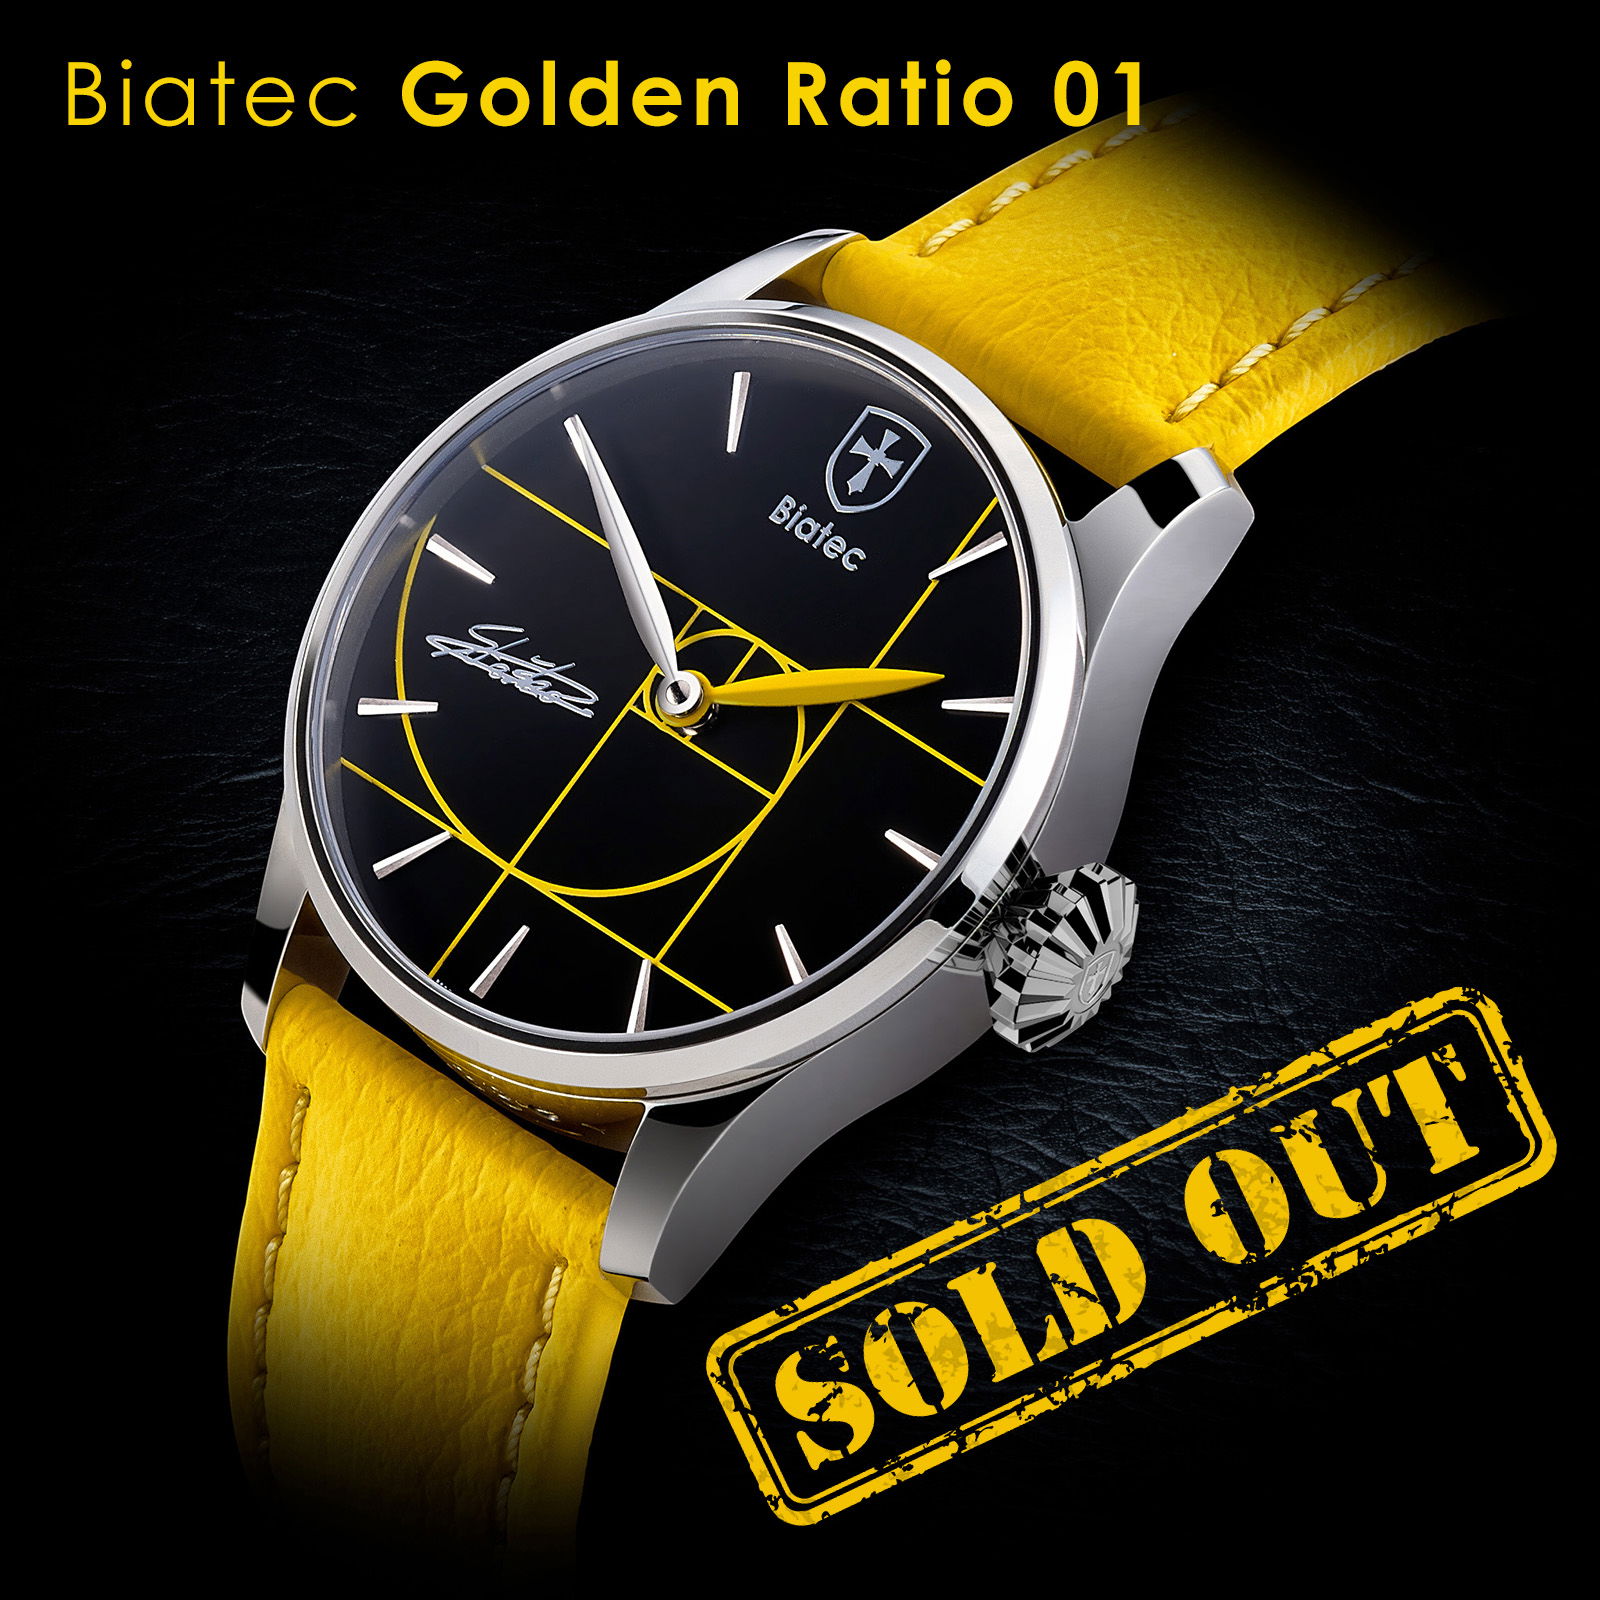 Biatec-Golden-ratio-01-sold out - square